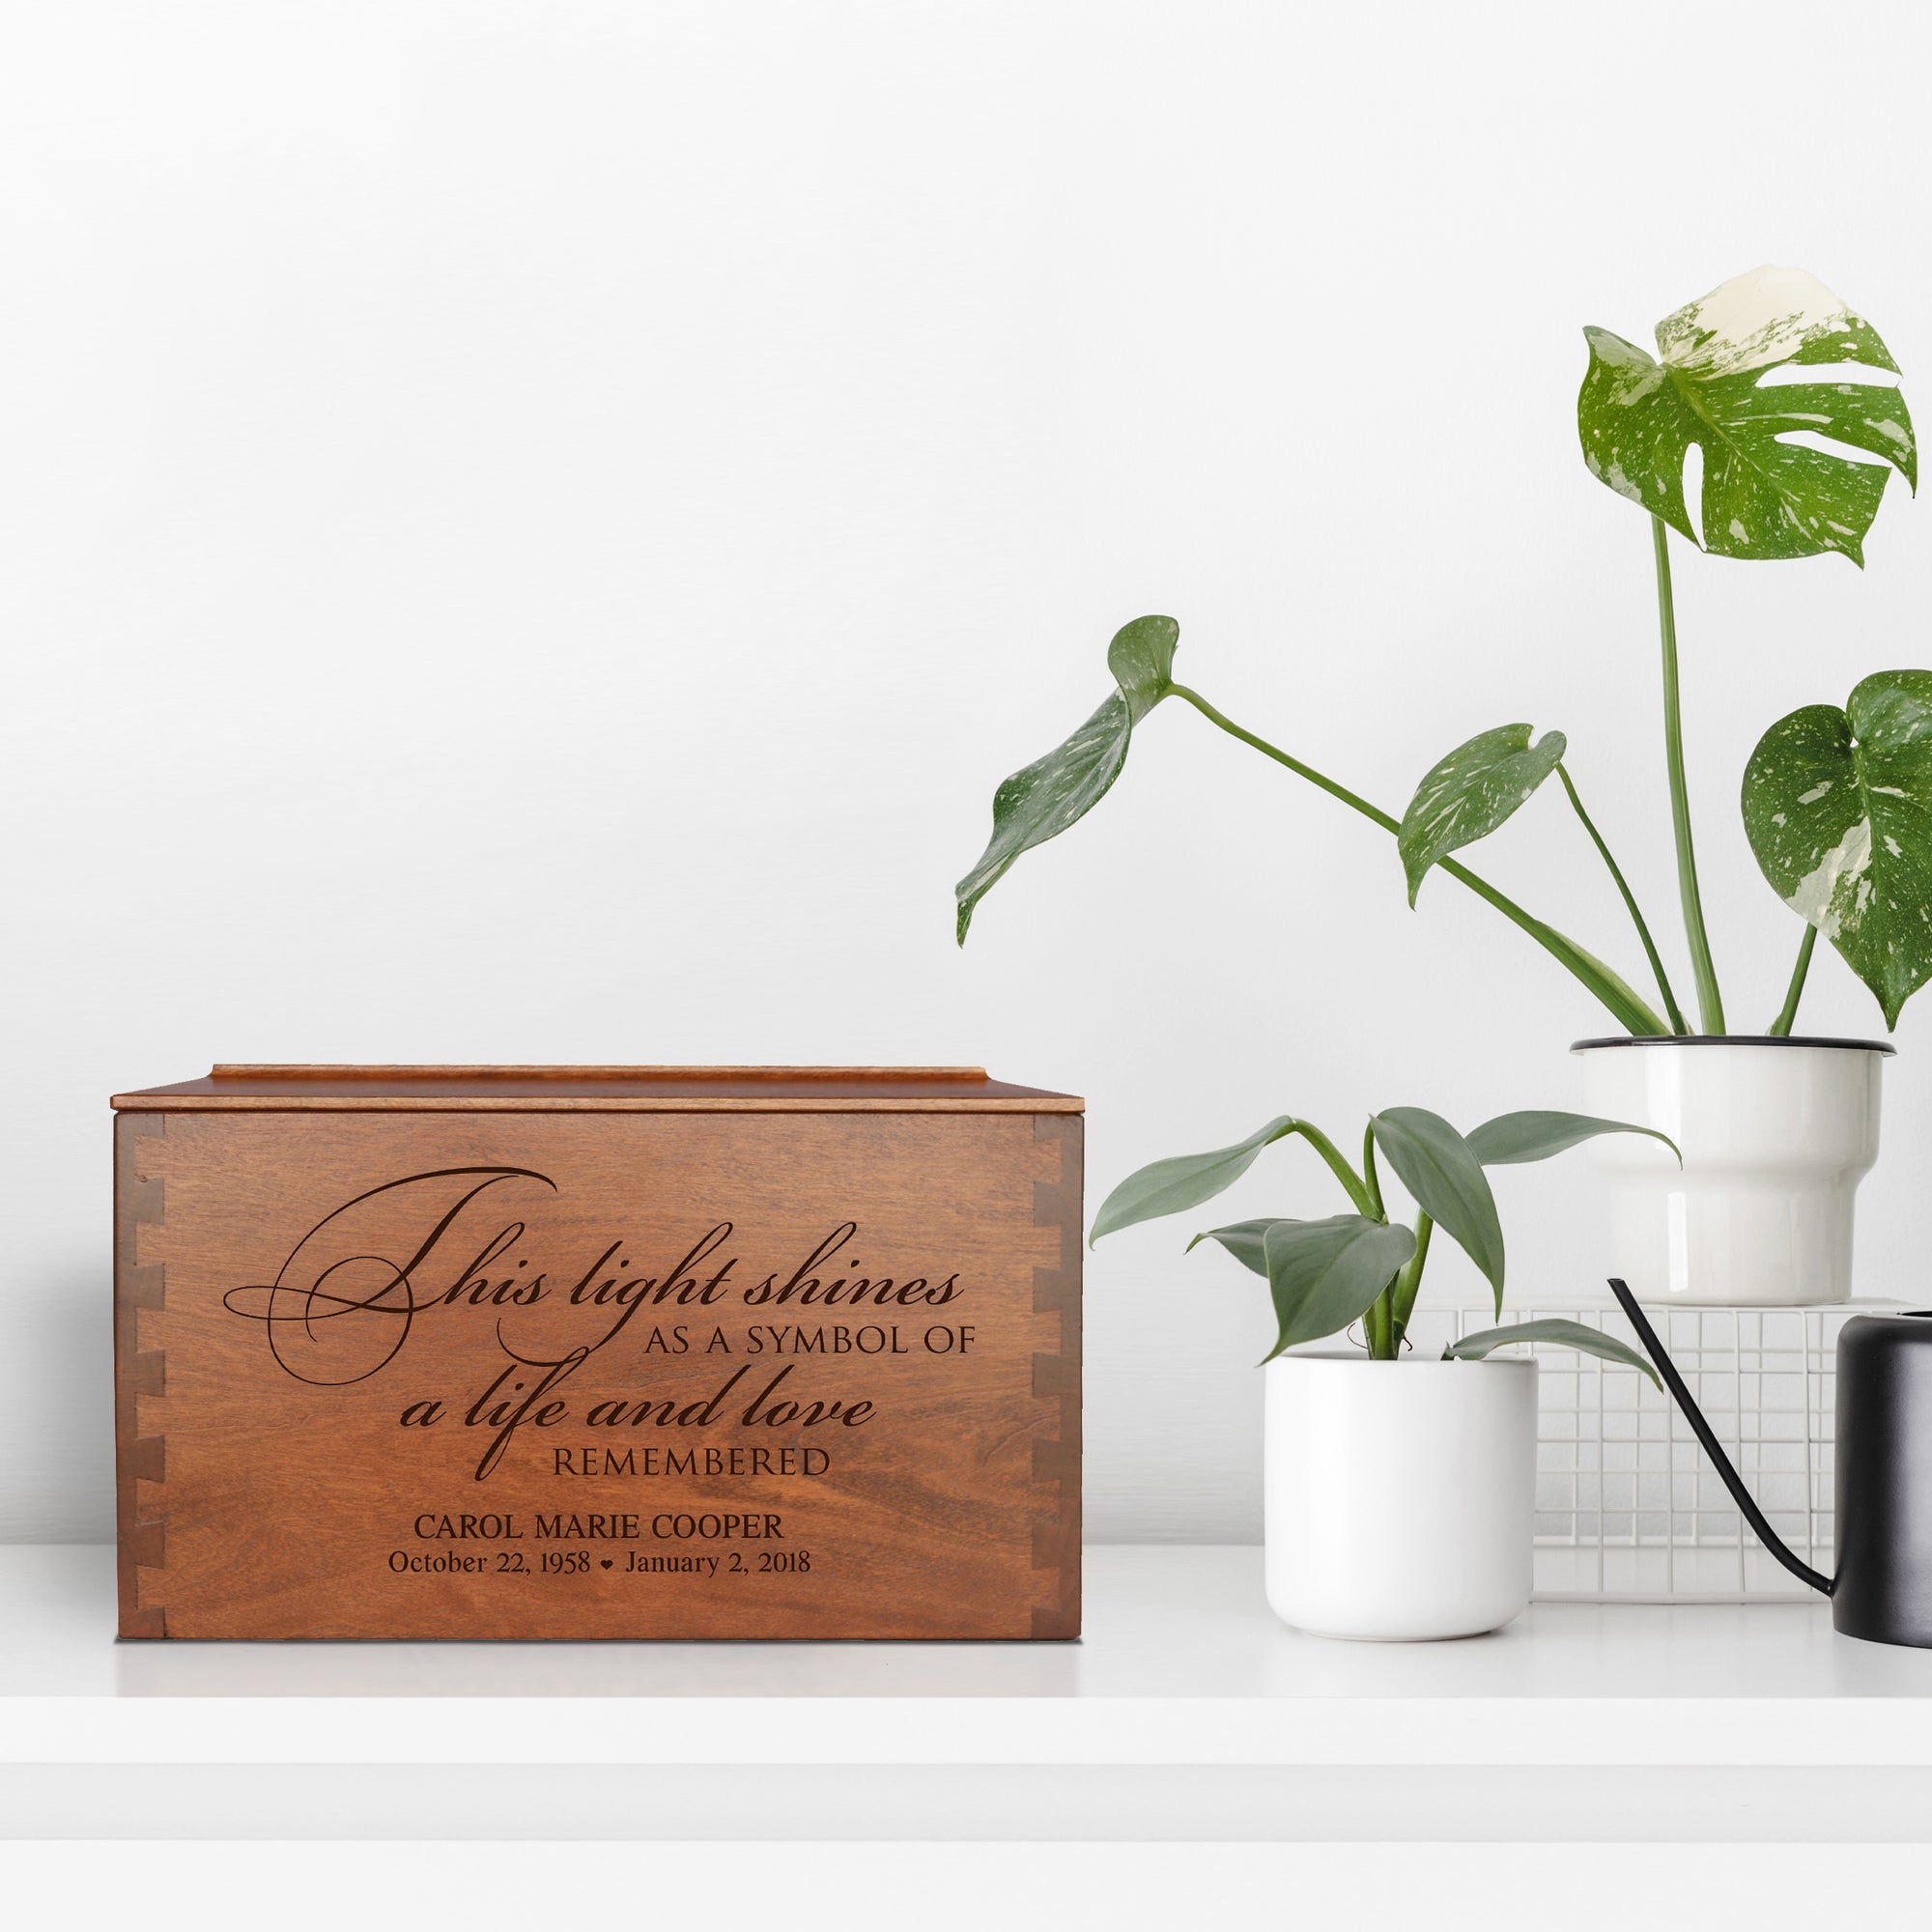 This Light Shines Personalized Memorial Decorative Dovetail Cremation Urn For Human Ashes Funeral and Condolence Keepsake